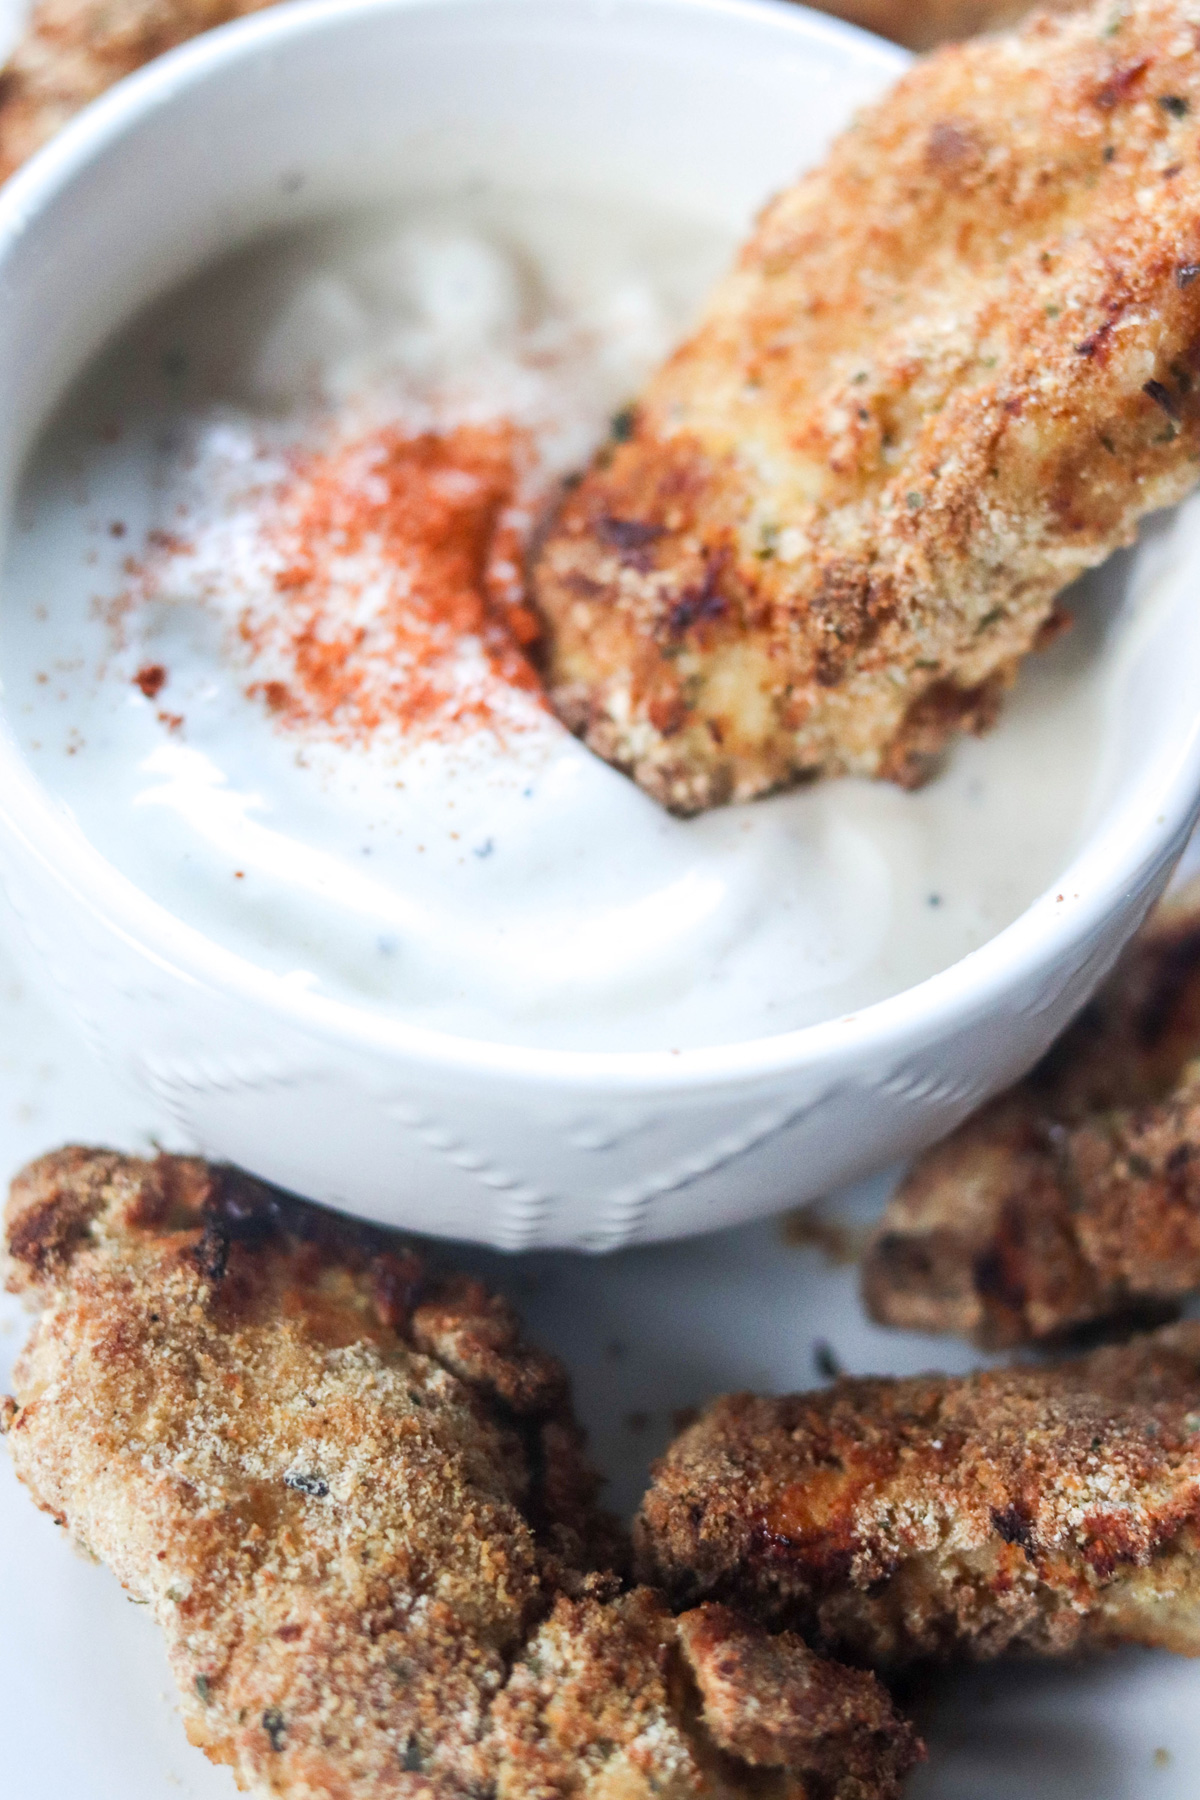 Dipping Air Fryer Chicken Fingers into a Ranch Dressing